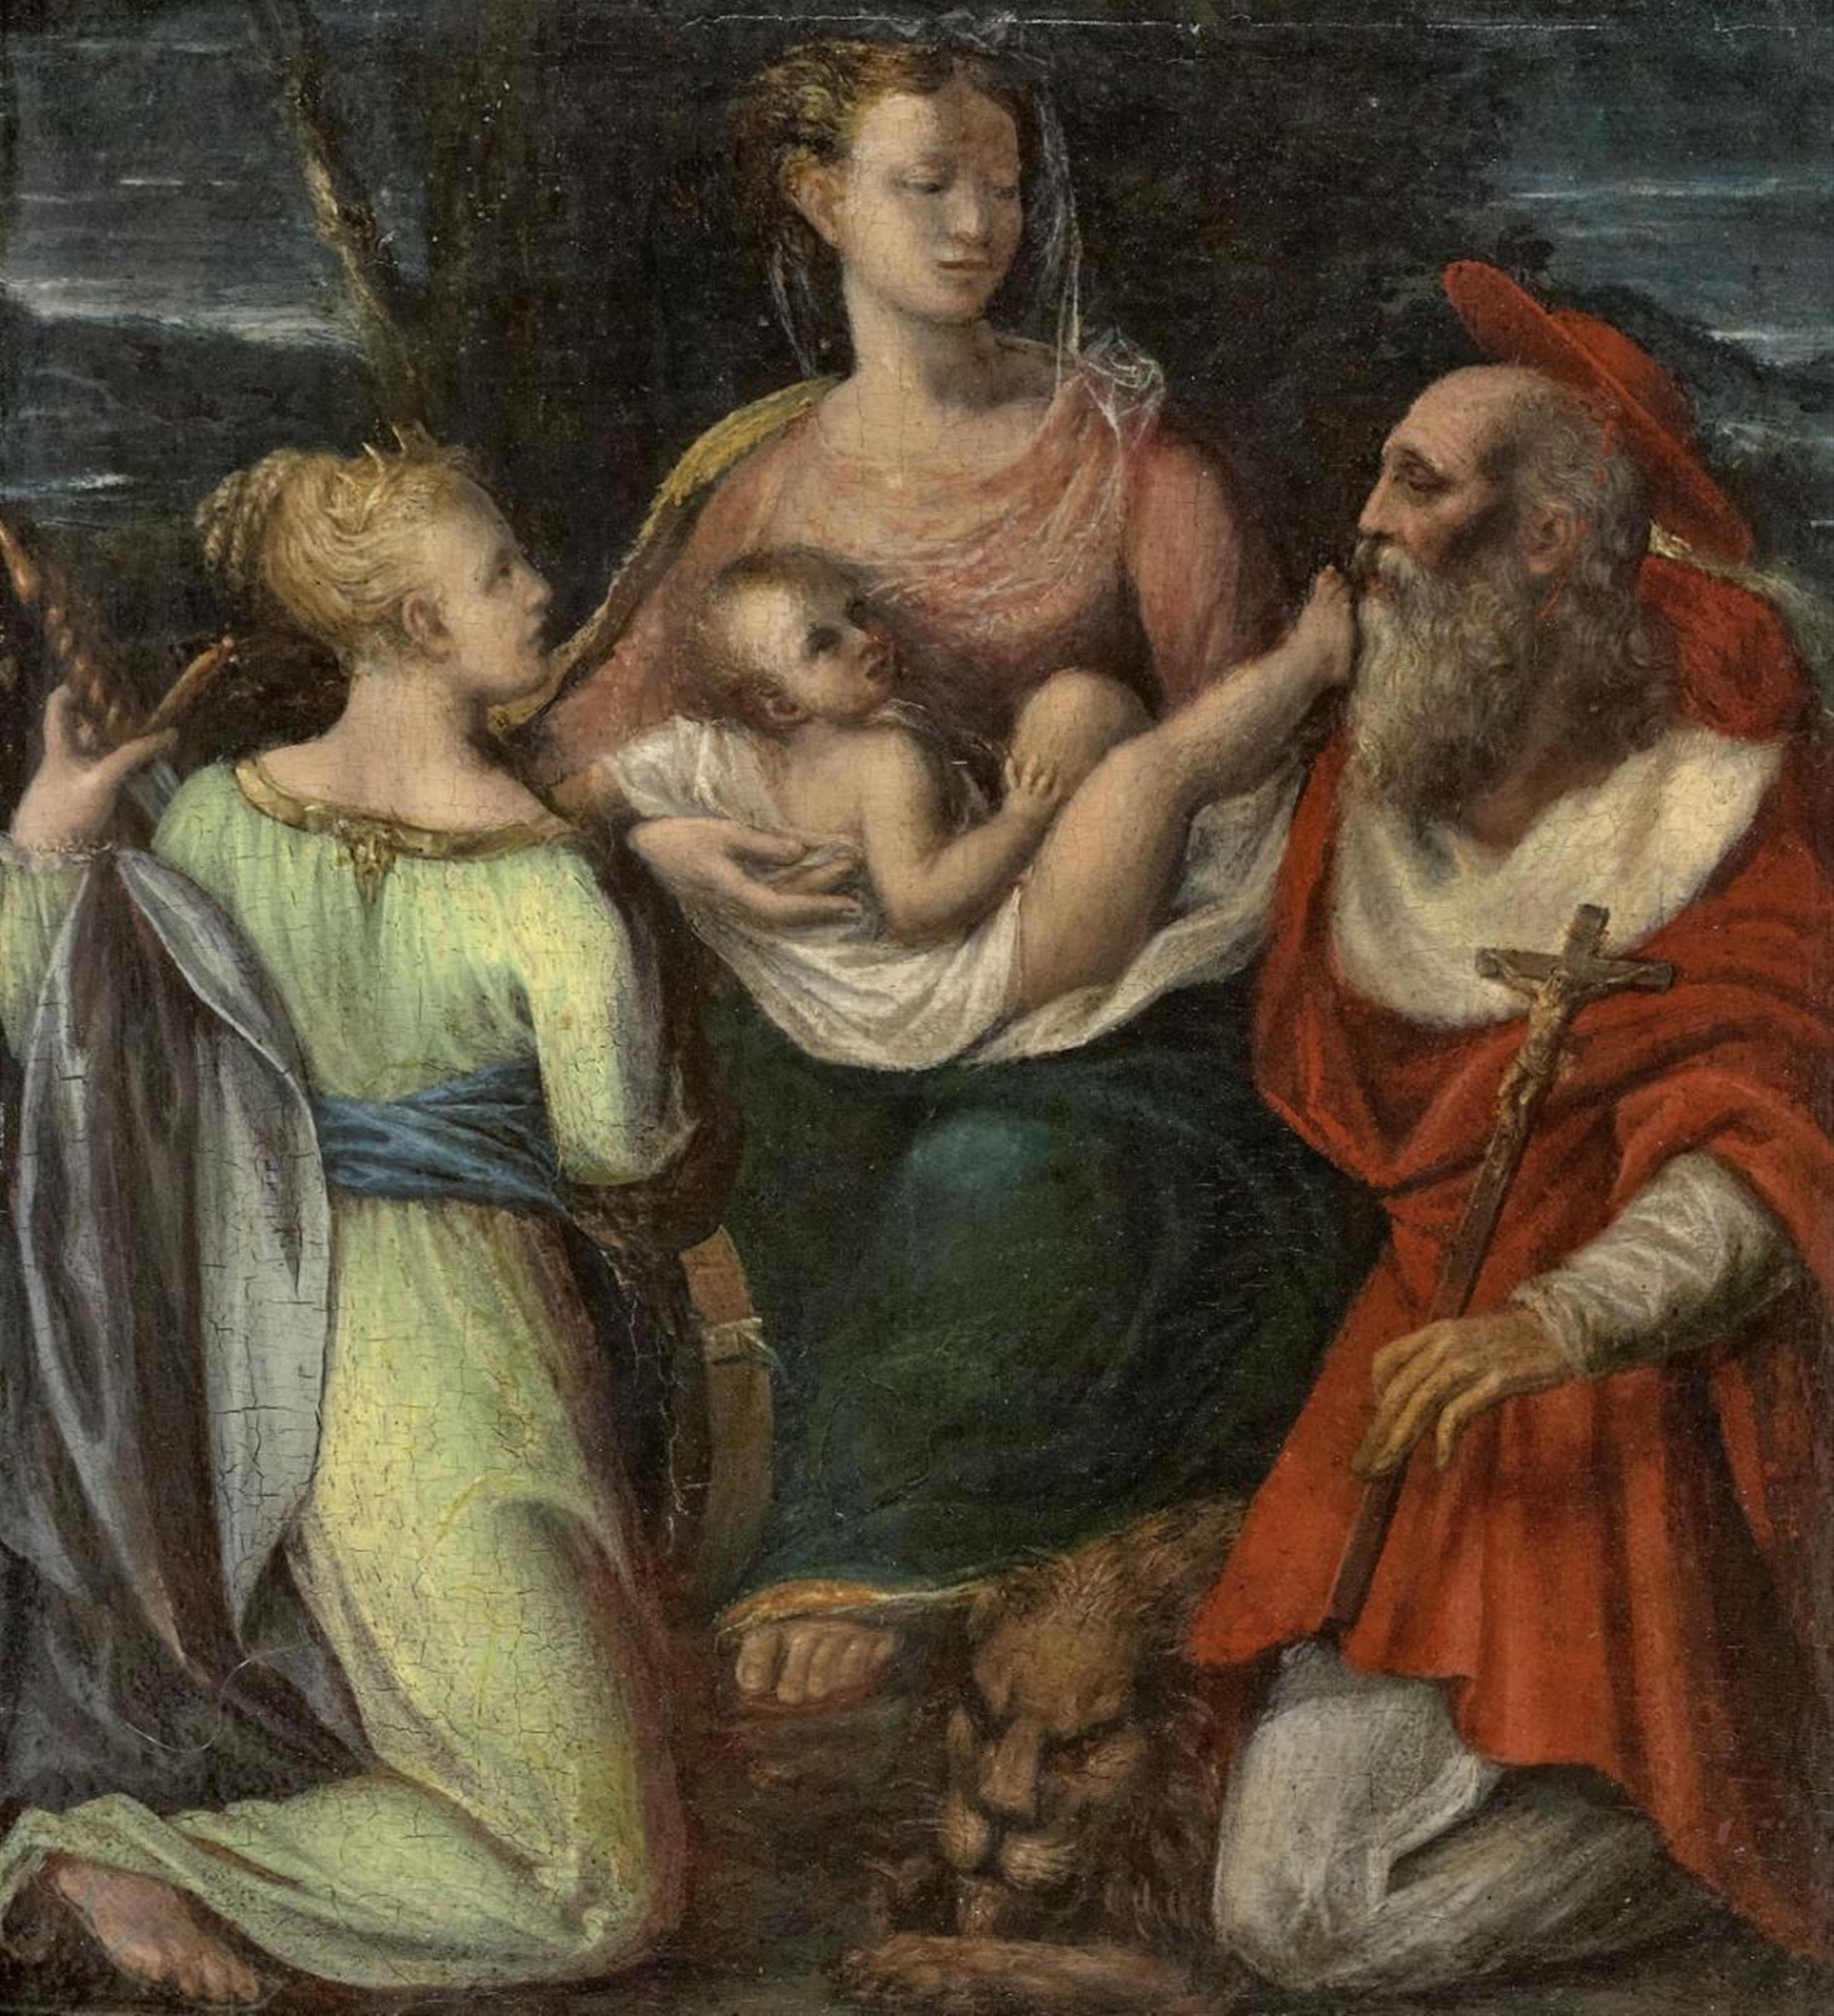 North Italian School, 16th century - THE VIRGIN WITH CHILD, ST. CATHERINE, AND ST. JEROME - image-1